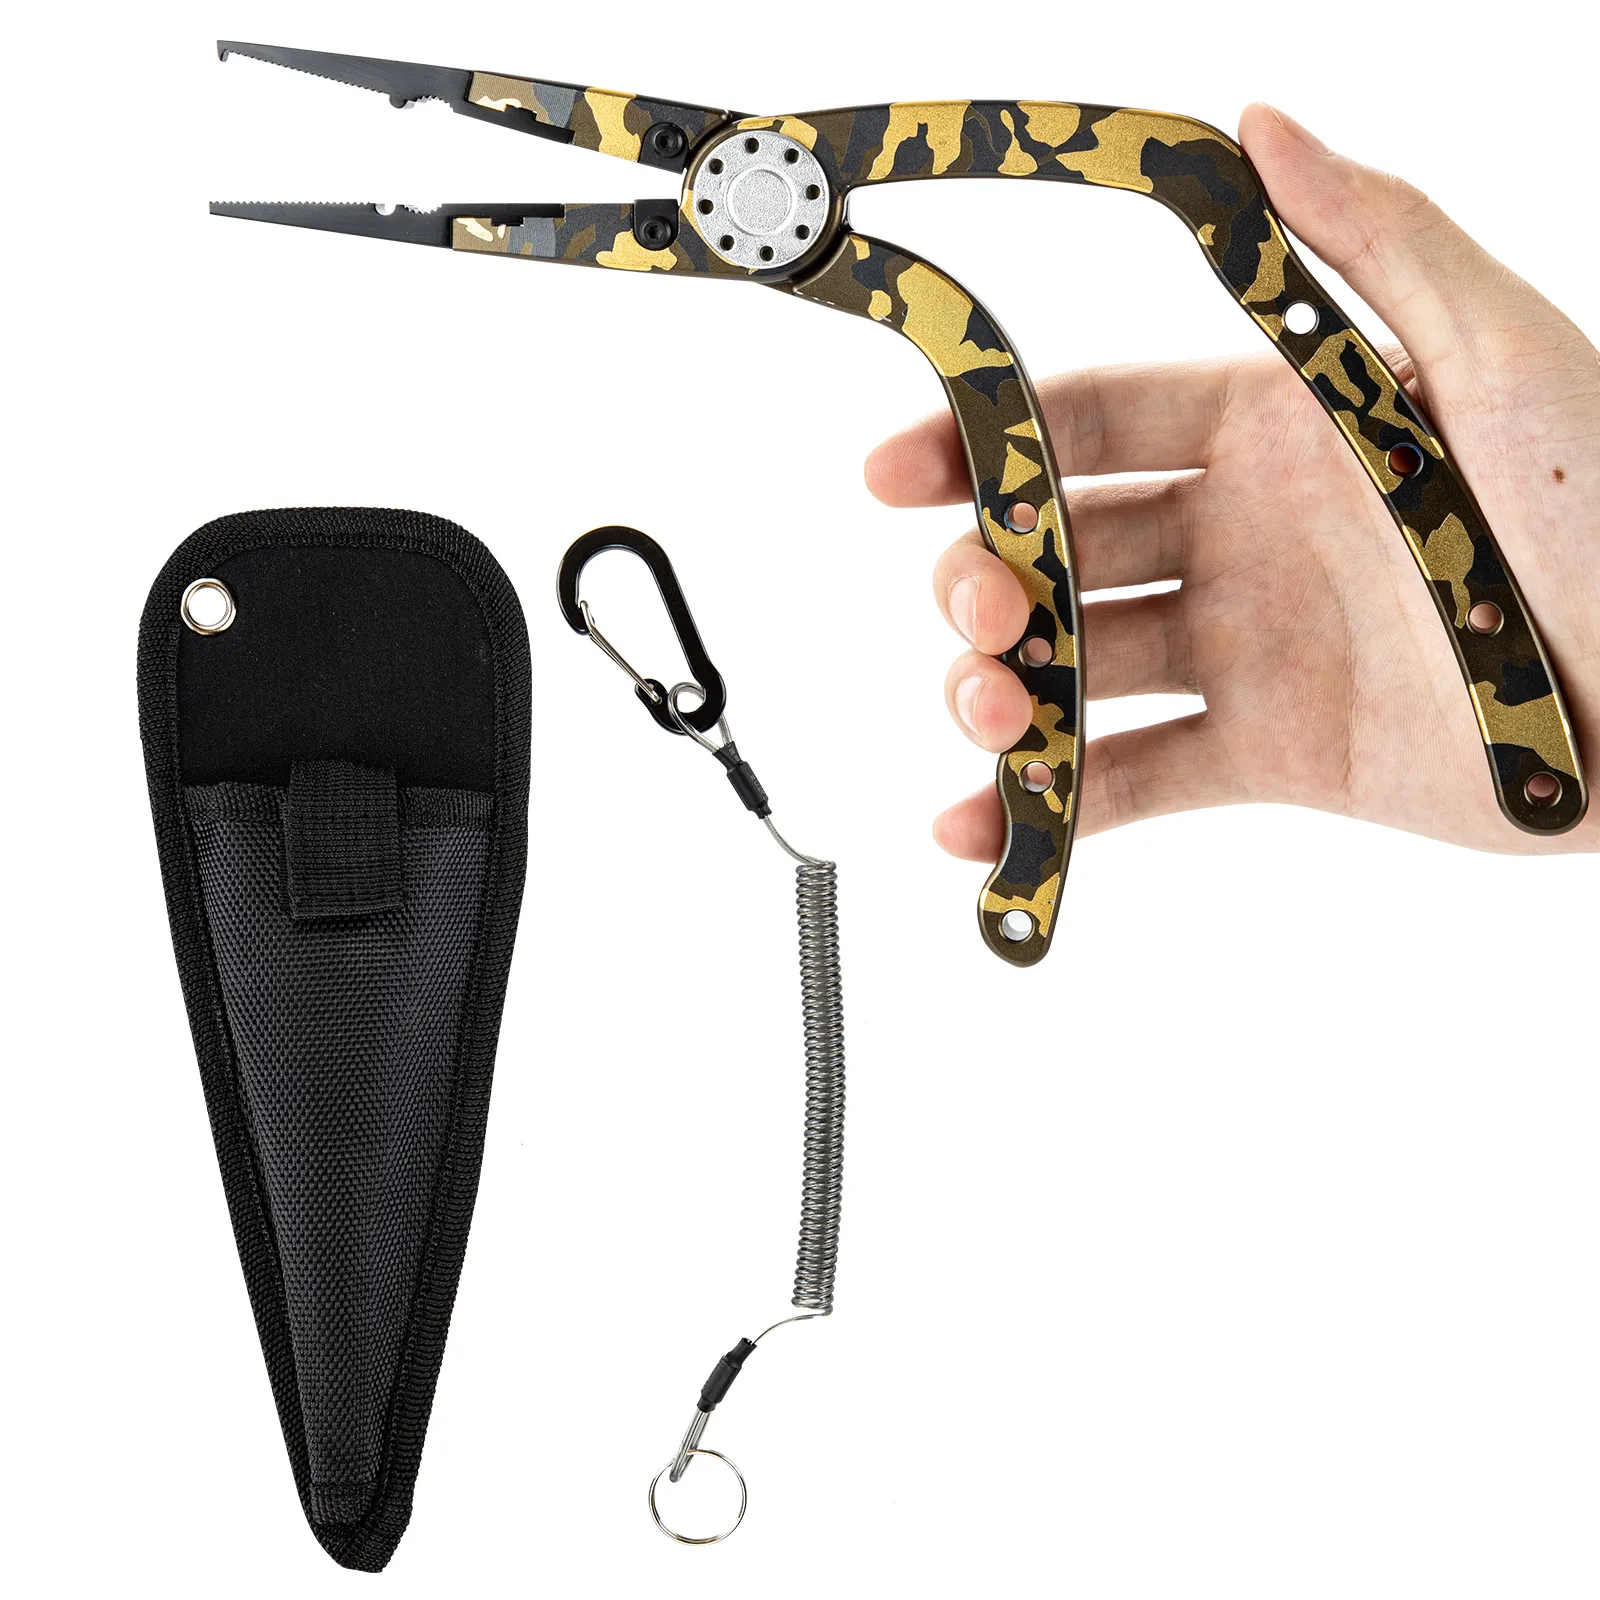 Newest Hot Sale Products Saltwater freshwater Fishing gear and tackle Line Locking Pliers Aluminum Fishing Pliers